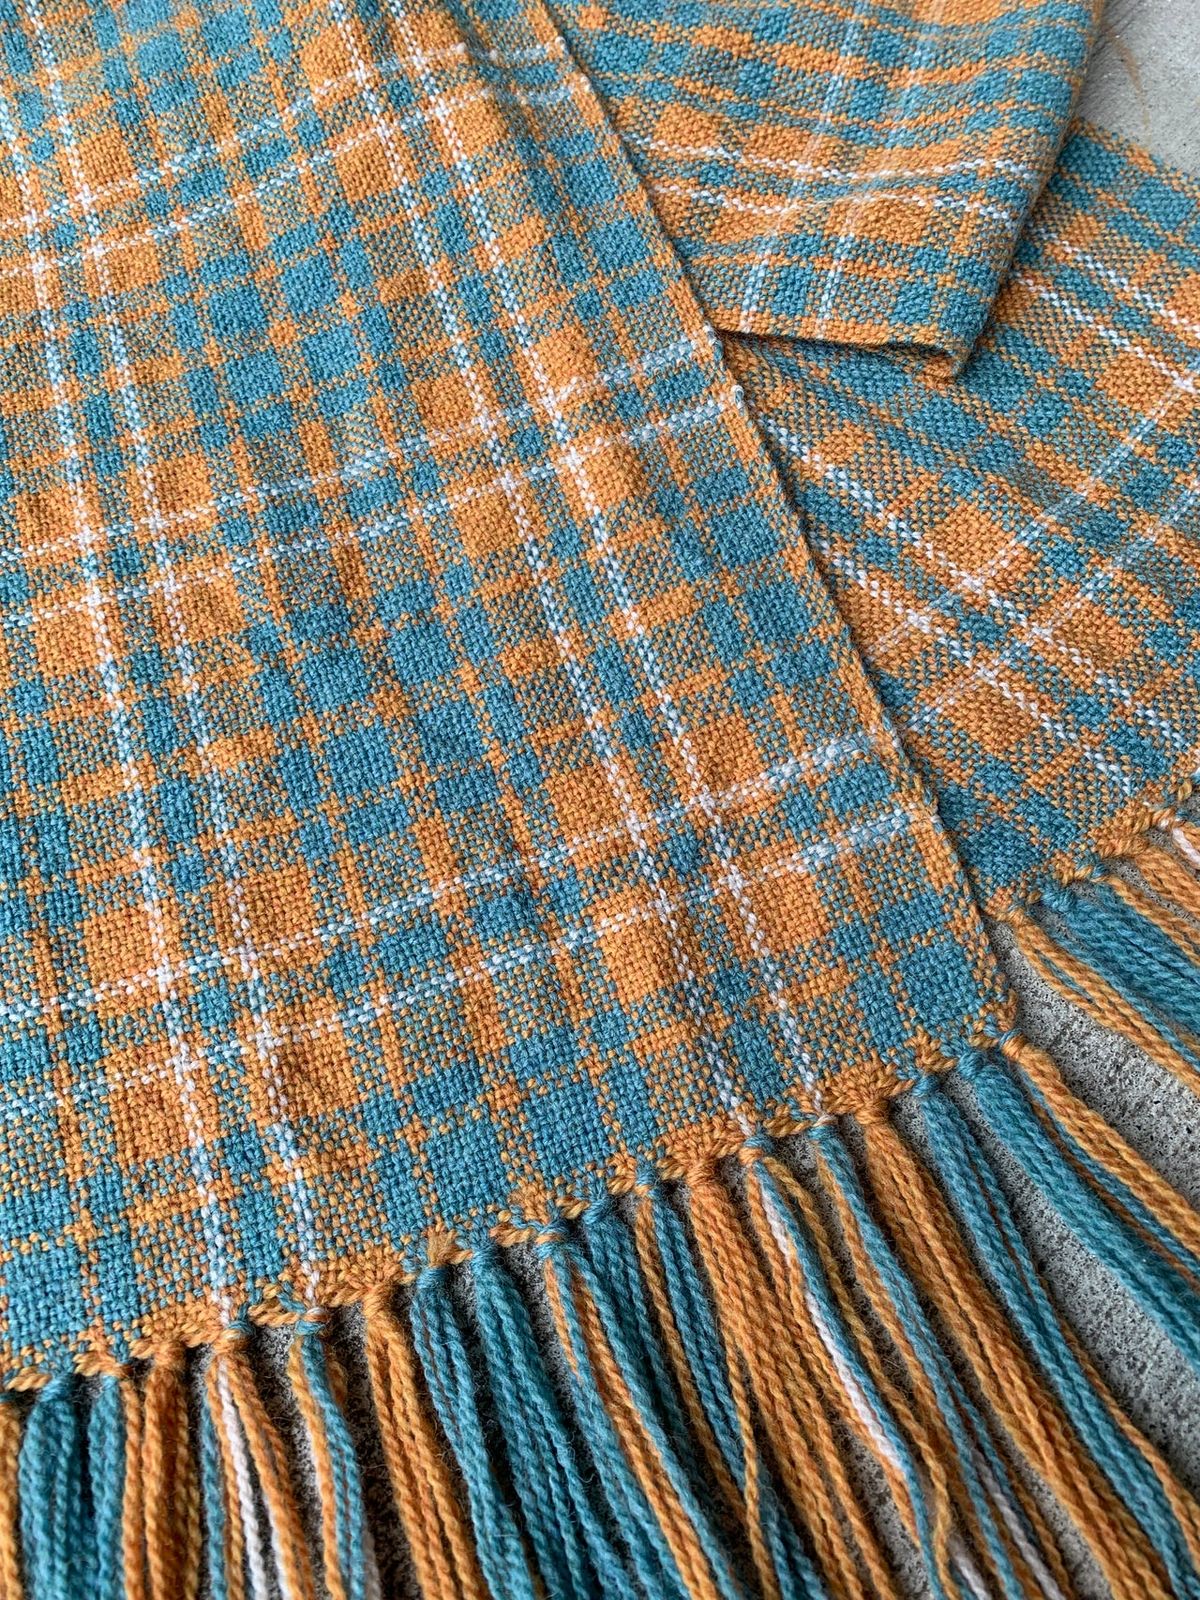 Seattle Sky Dyeworks Plaid Weaving Clinic